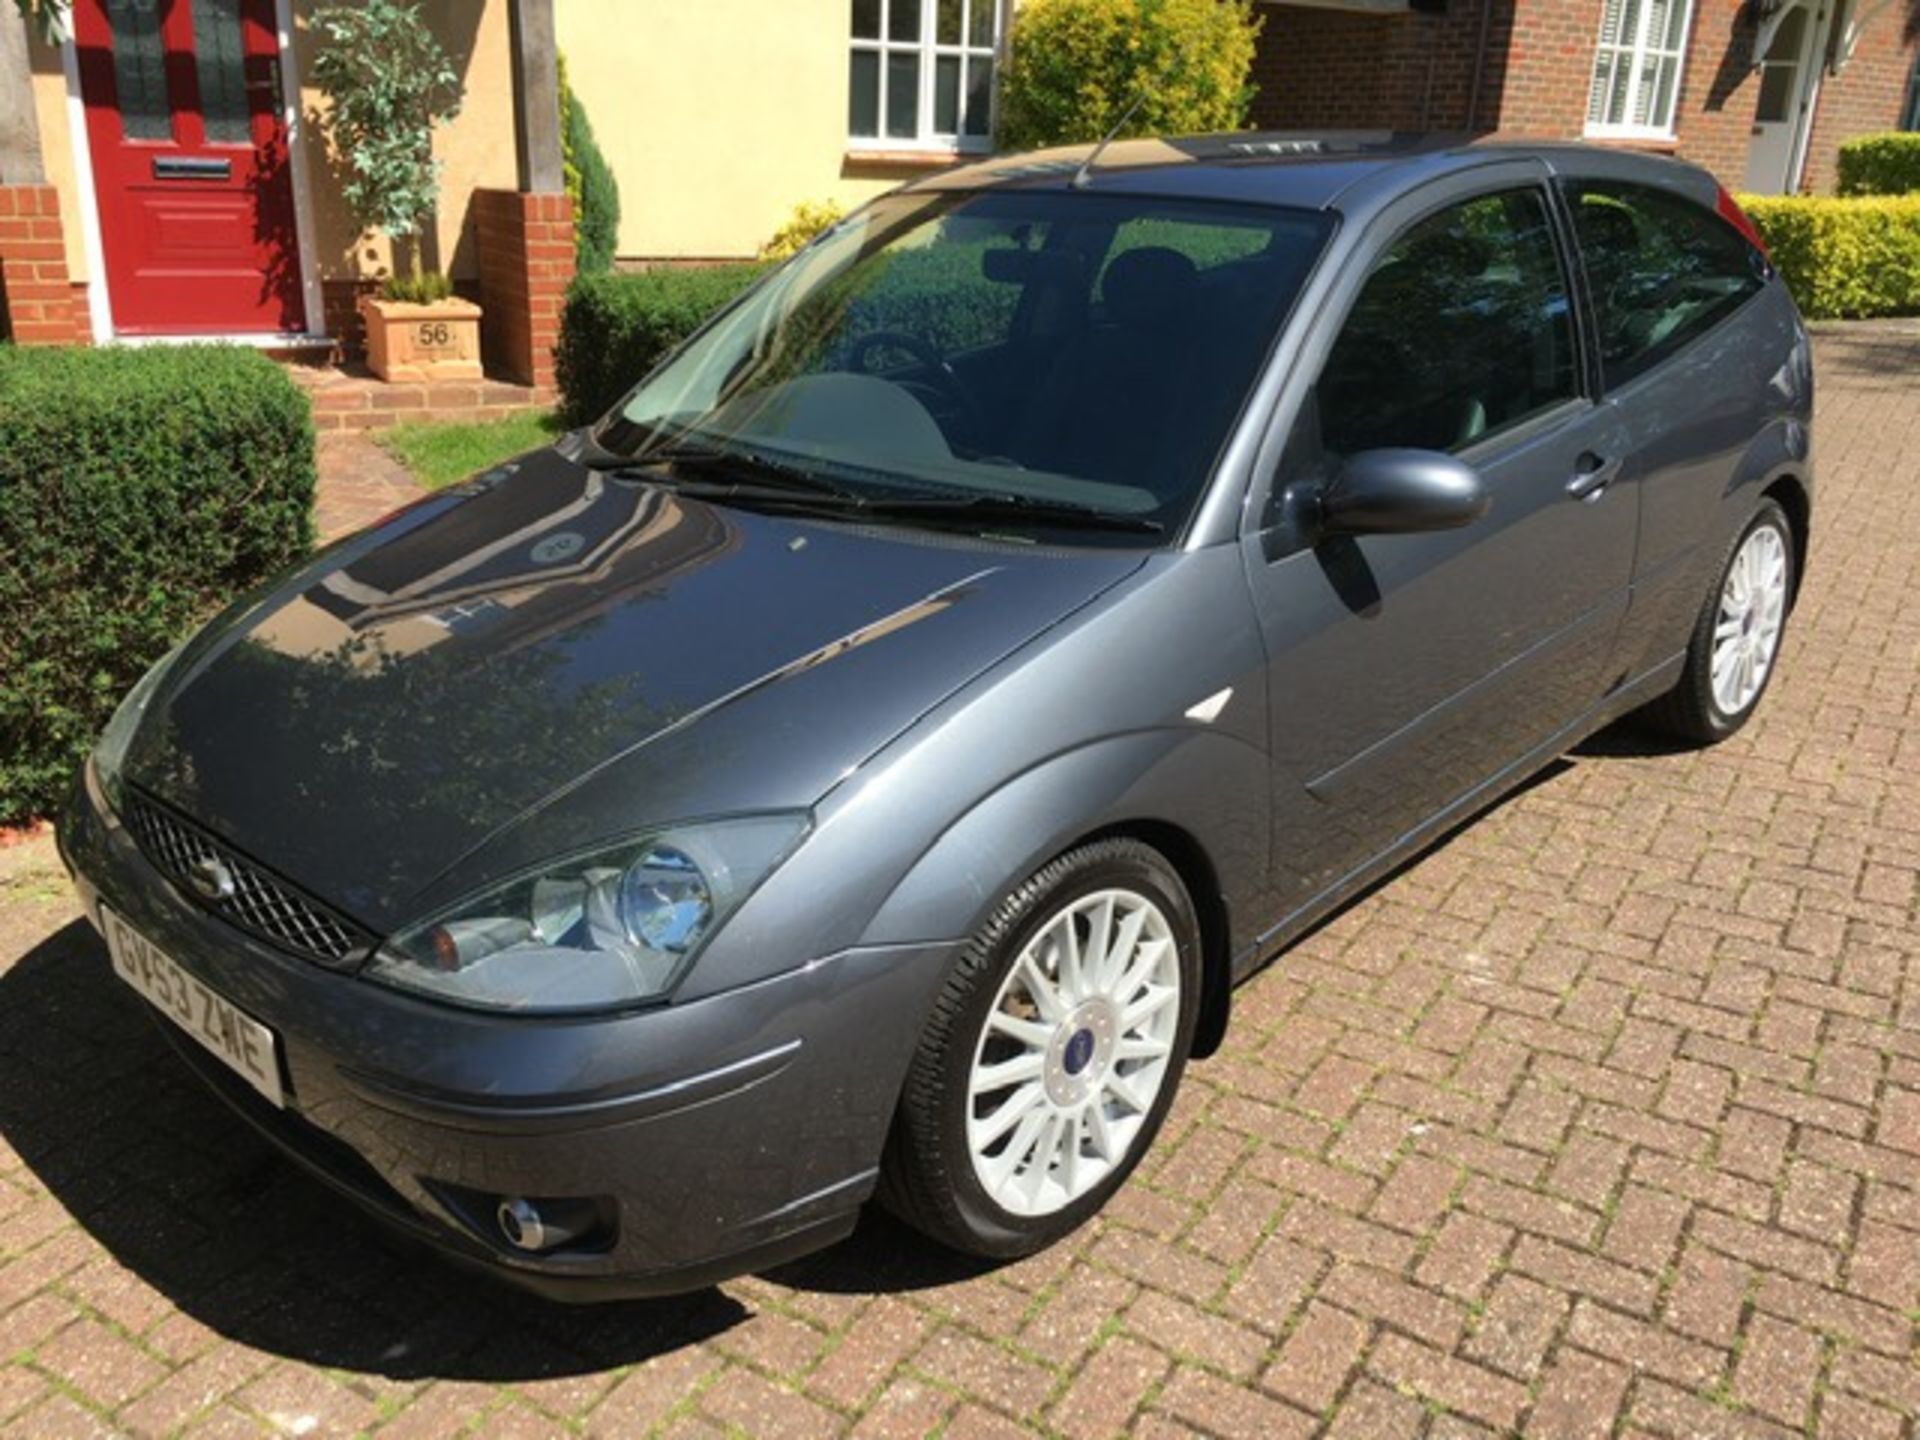 2004 Ford Focus ST170 - Image 2 of 5